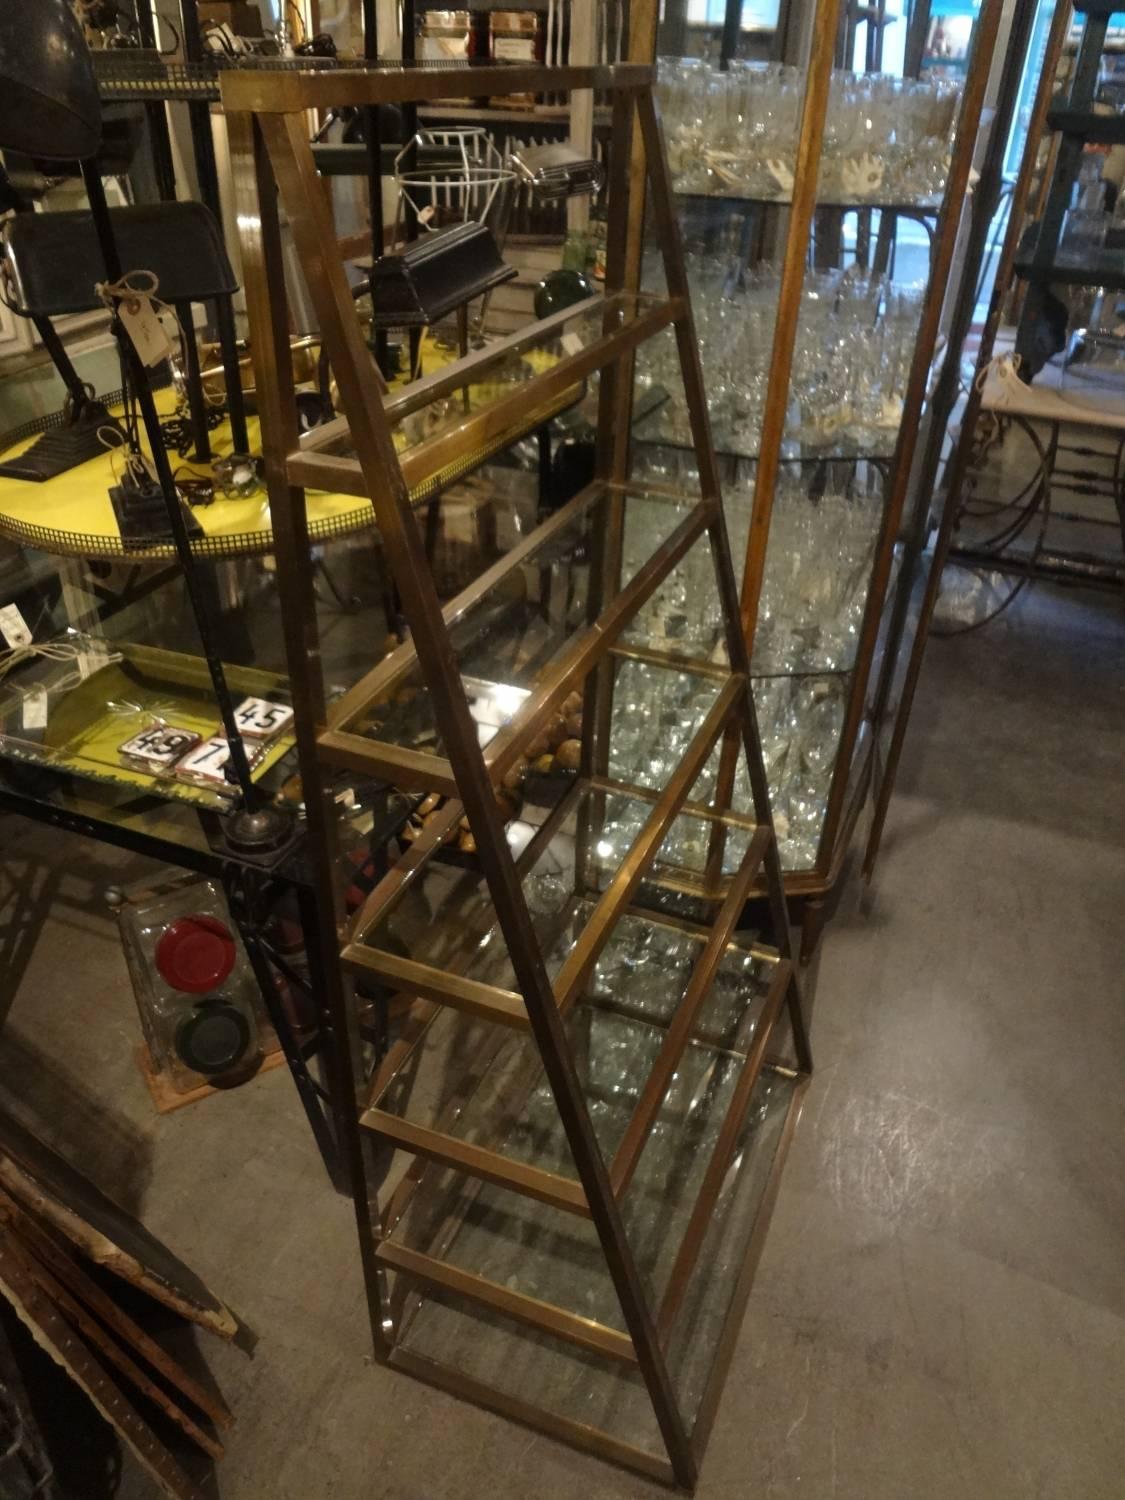 Cool vintage French shelving unit made of brass, with glass shelving. Elegant shape and sleek design.